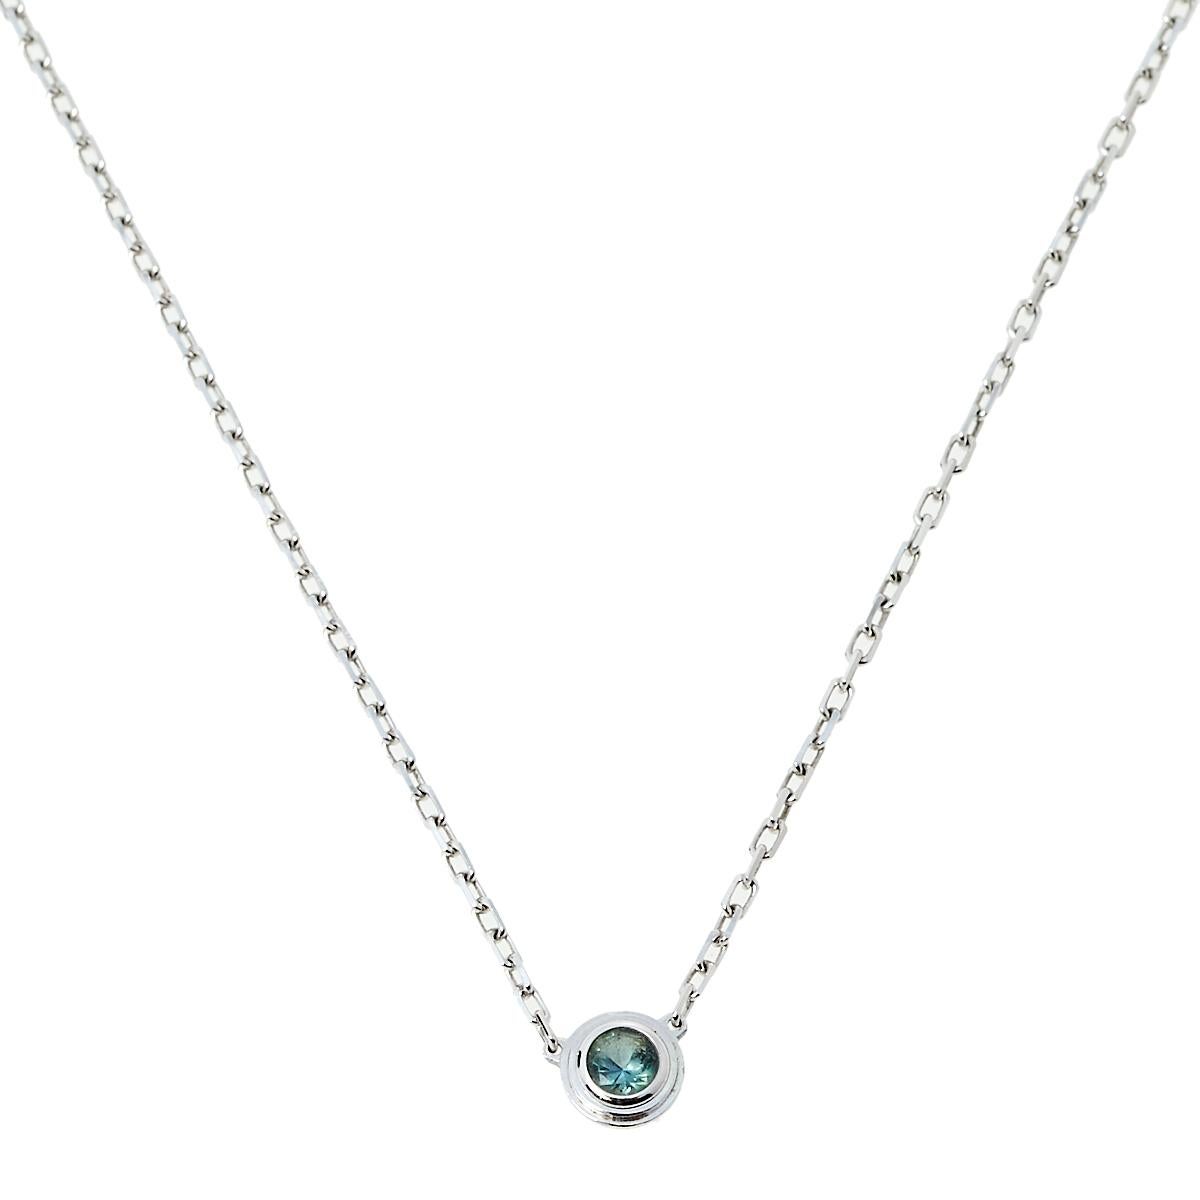 Simple is the new elegant and this necklace from Cartier is a clear example of the same. Cartier 18k white gold, this necklace is centered with a sapphire pendant held by a slender chain and finished with a lobster clasp closure. This understated